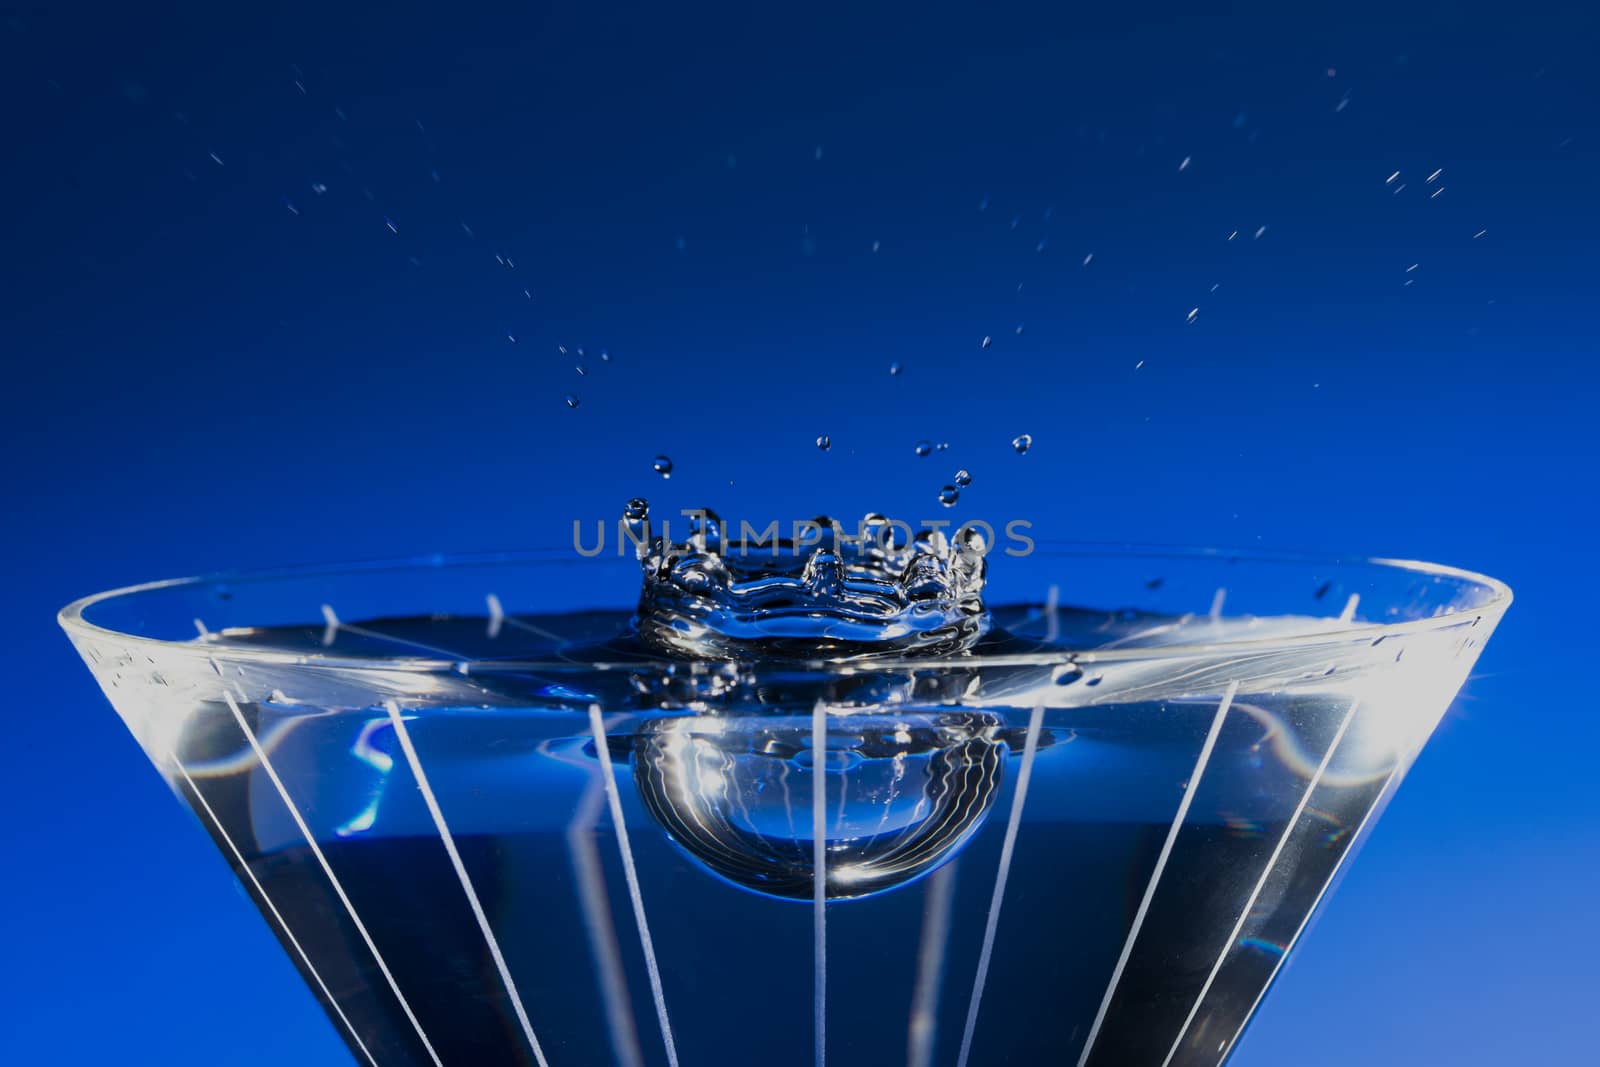 Stop motion of water drop splashing down into filled martini glass, with blue background.